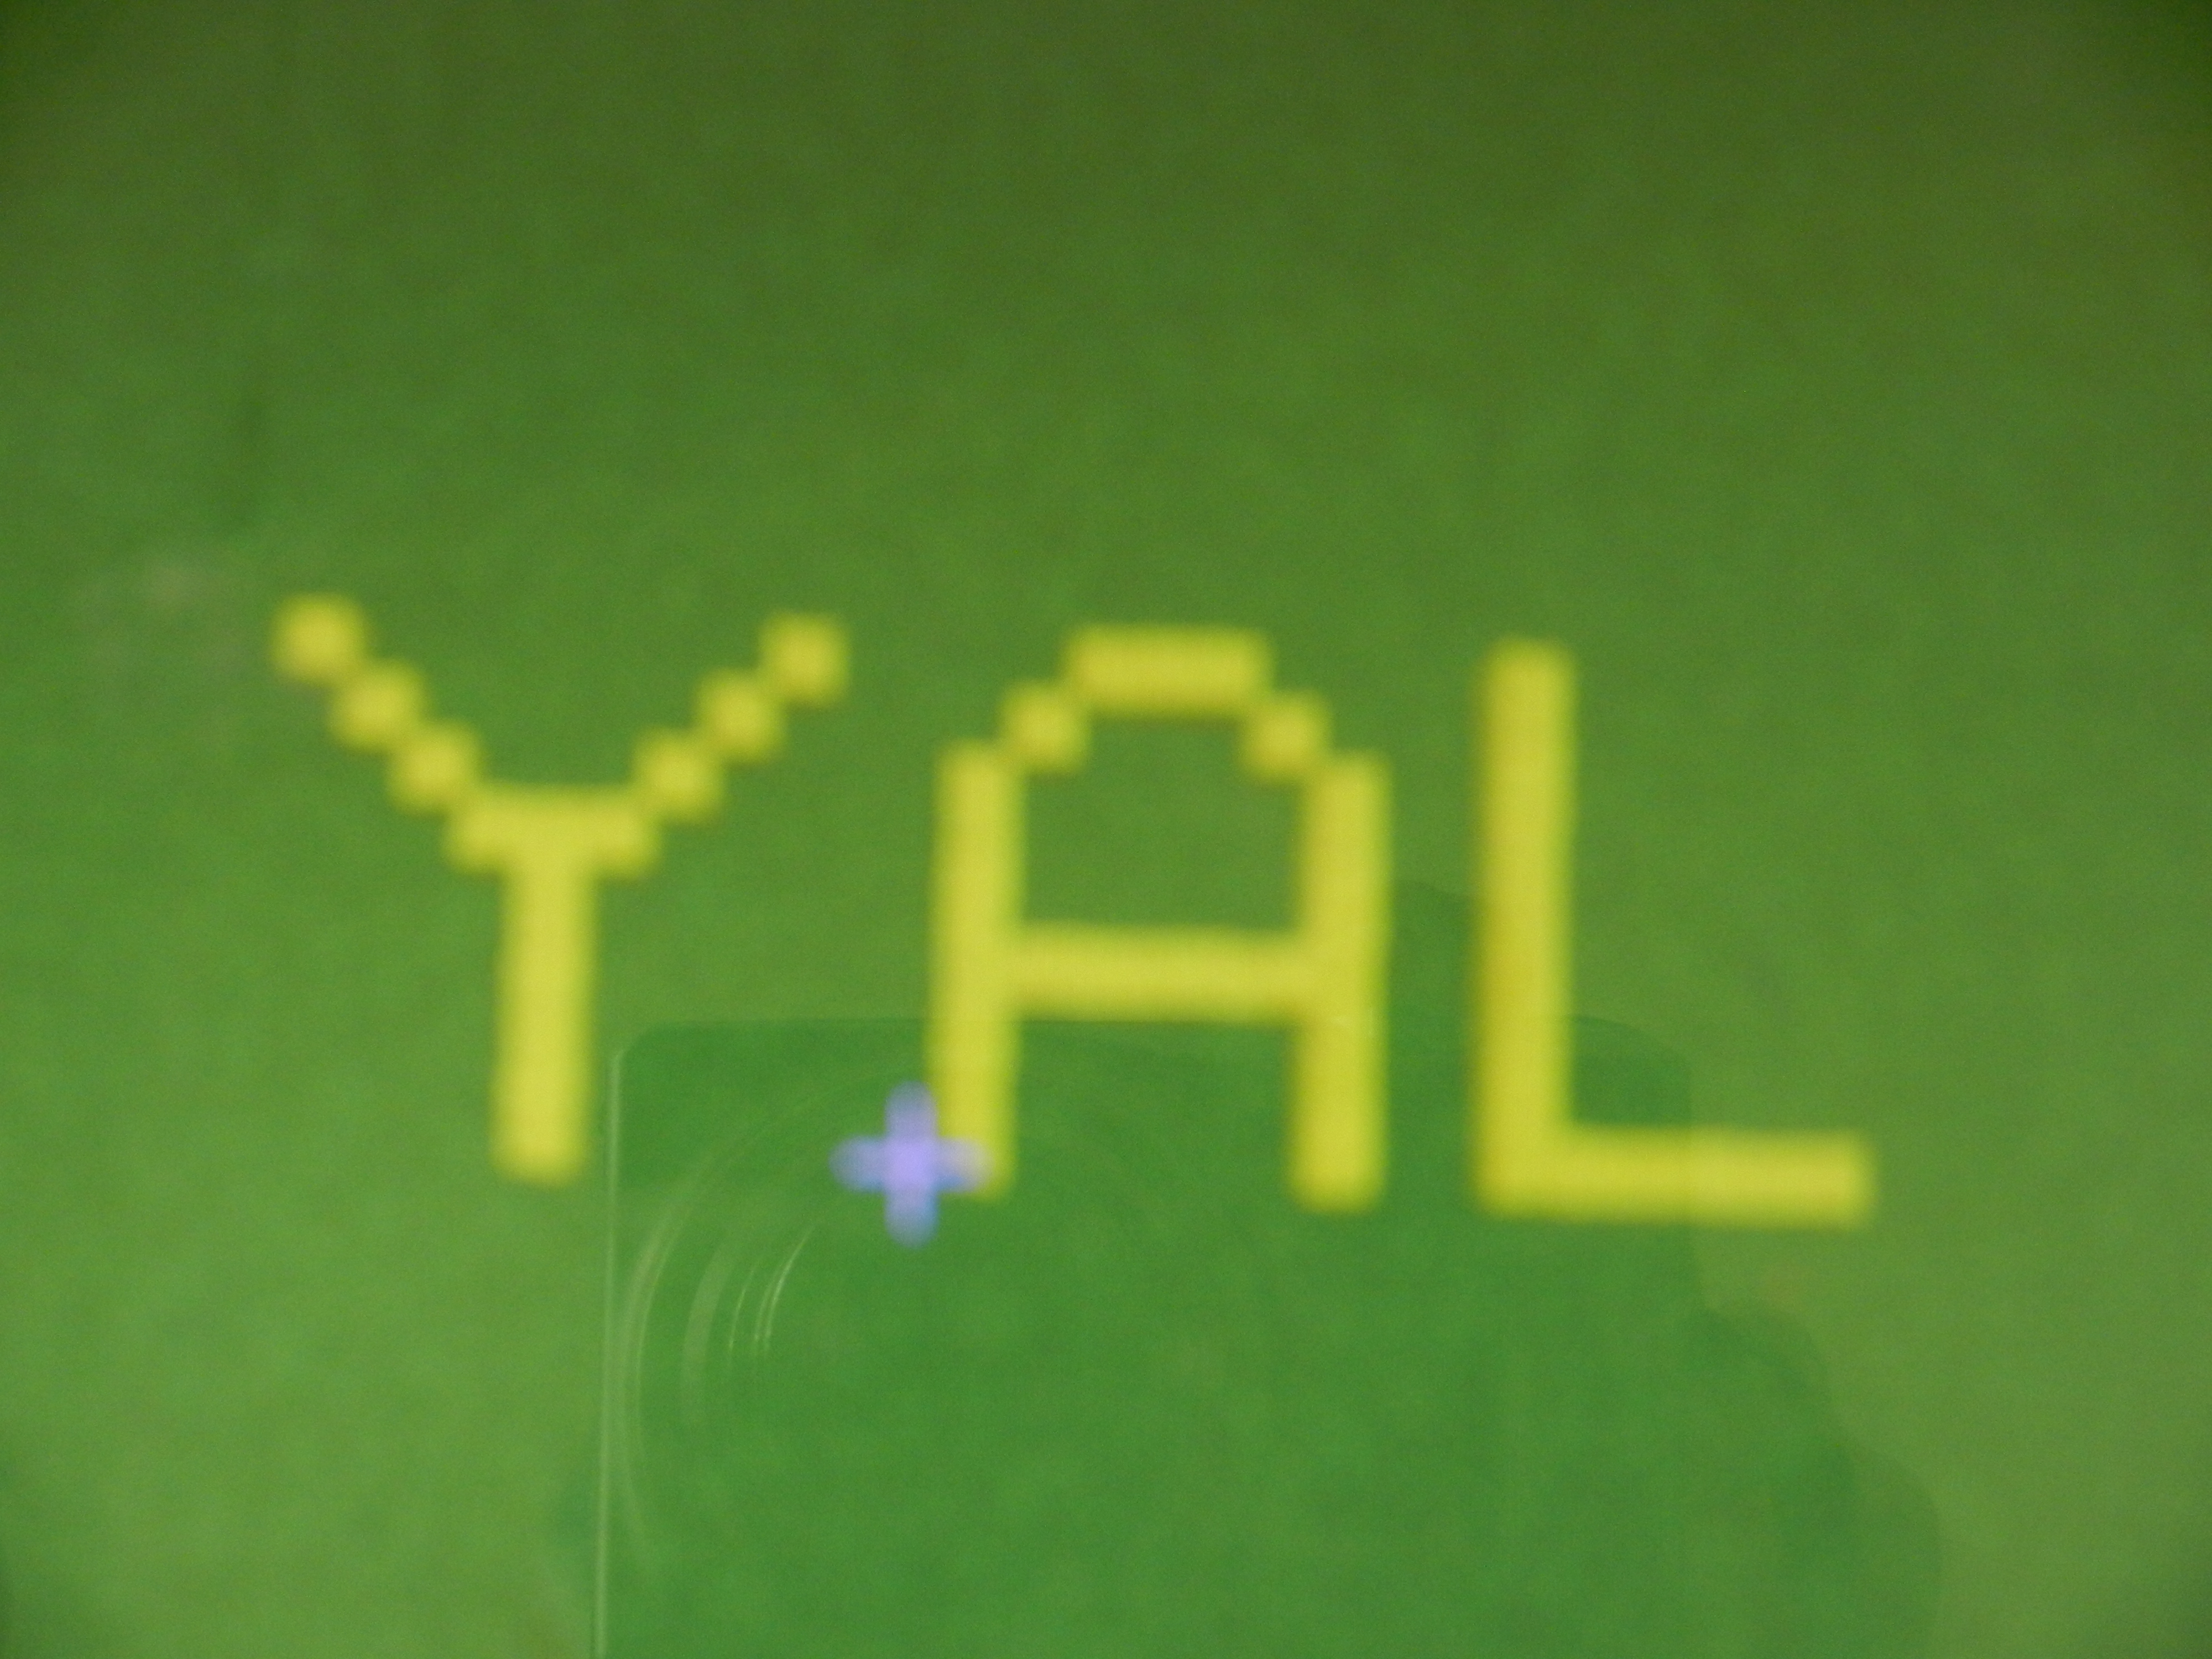 An abbreviation for YAL built on a Minecraft server.